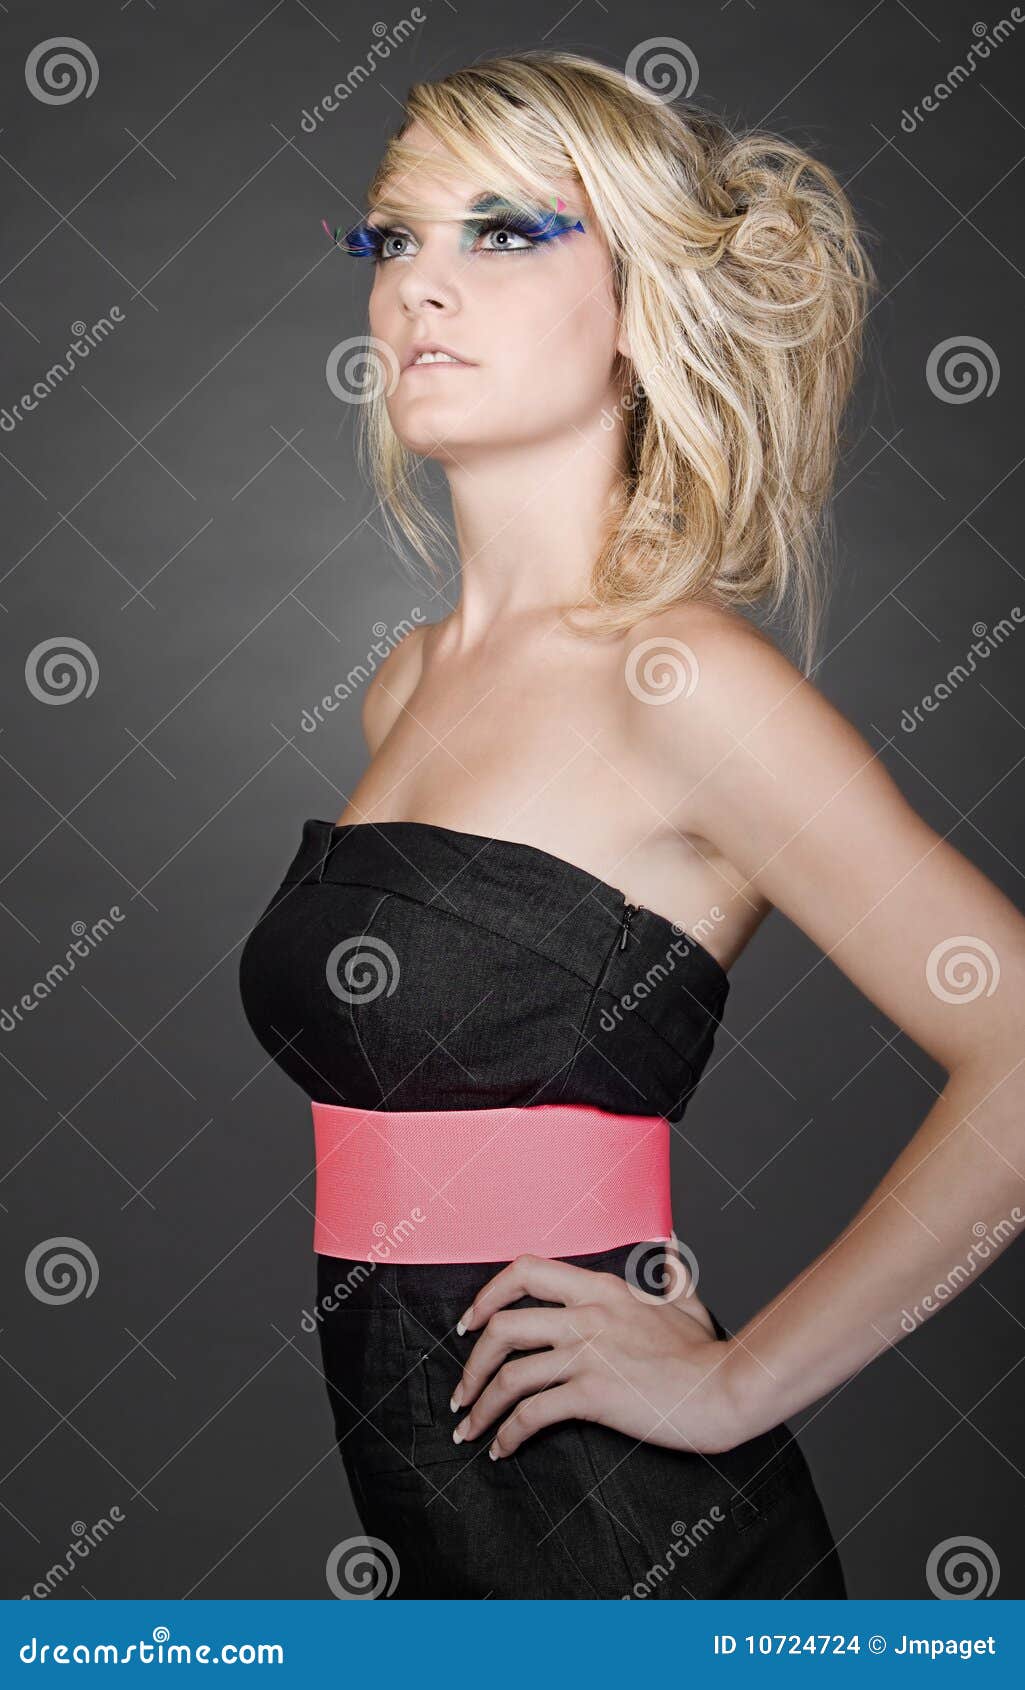 High Fashion Blonde Teen Stock Photo Image Of Attra